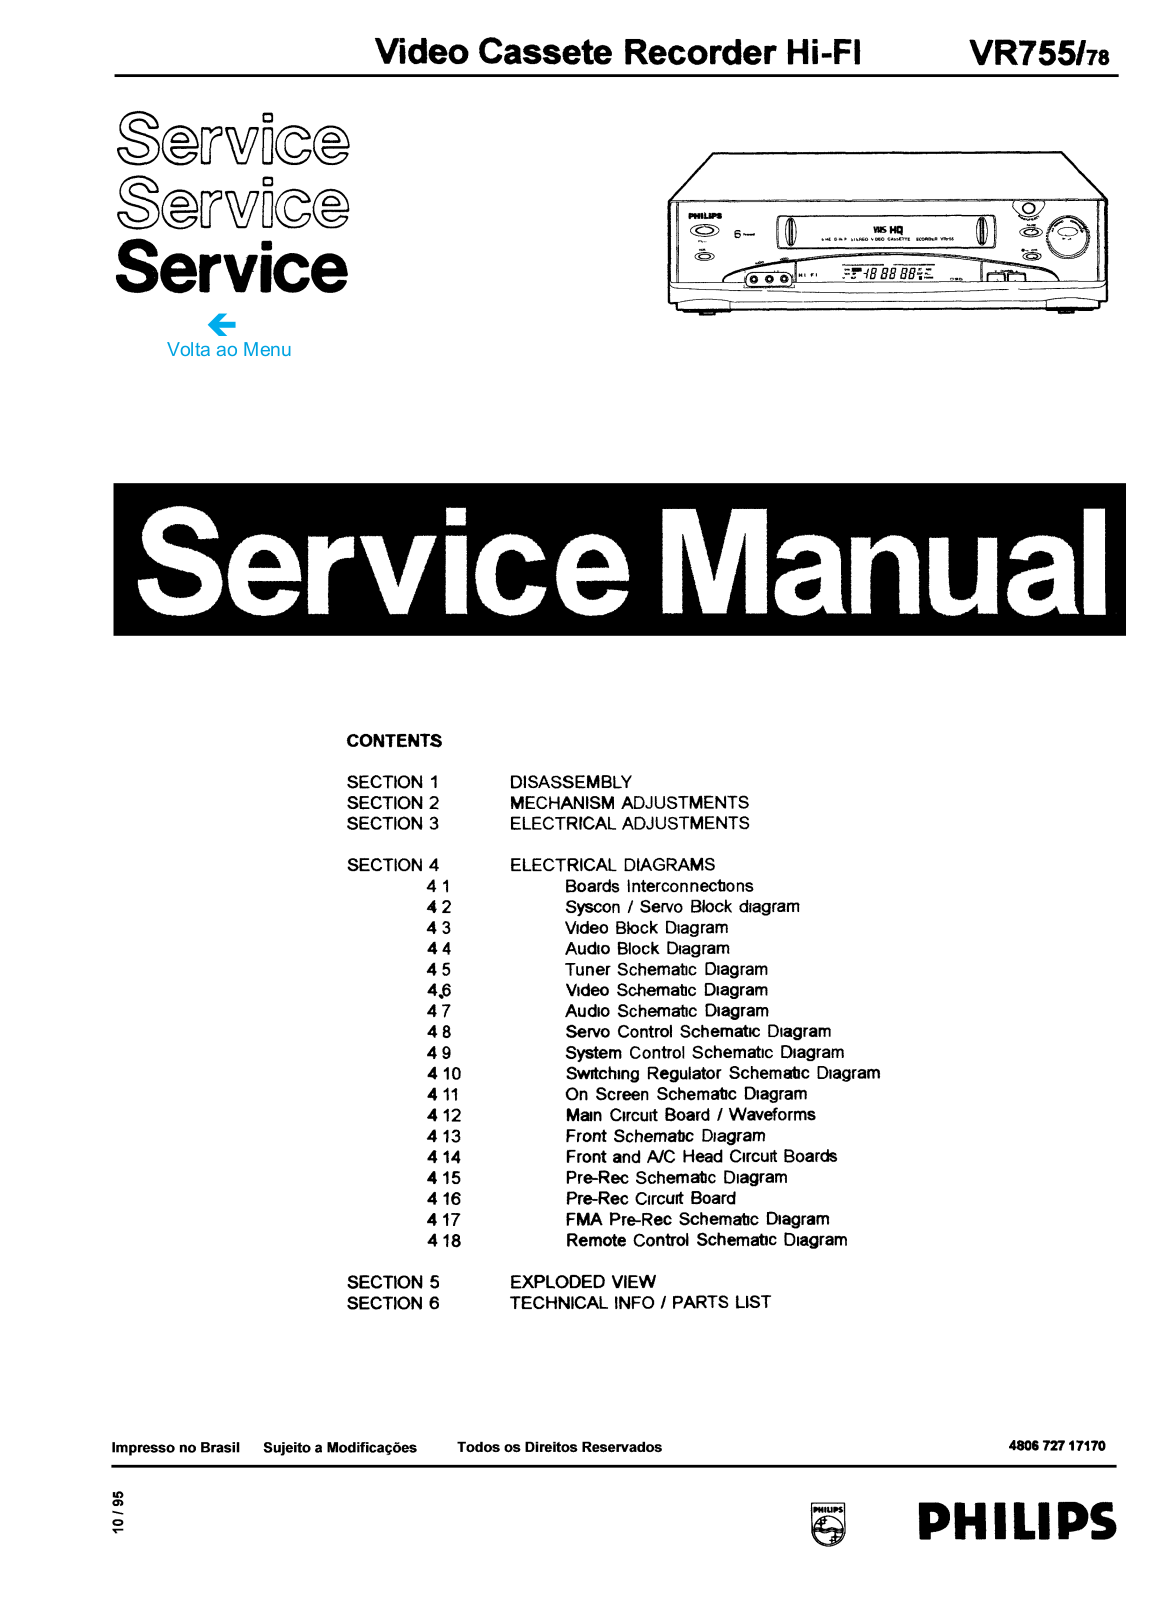 PHILIPS VR755-78 Service Manual